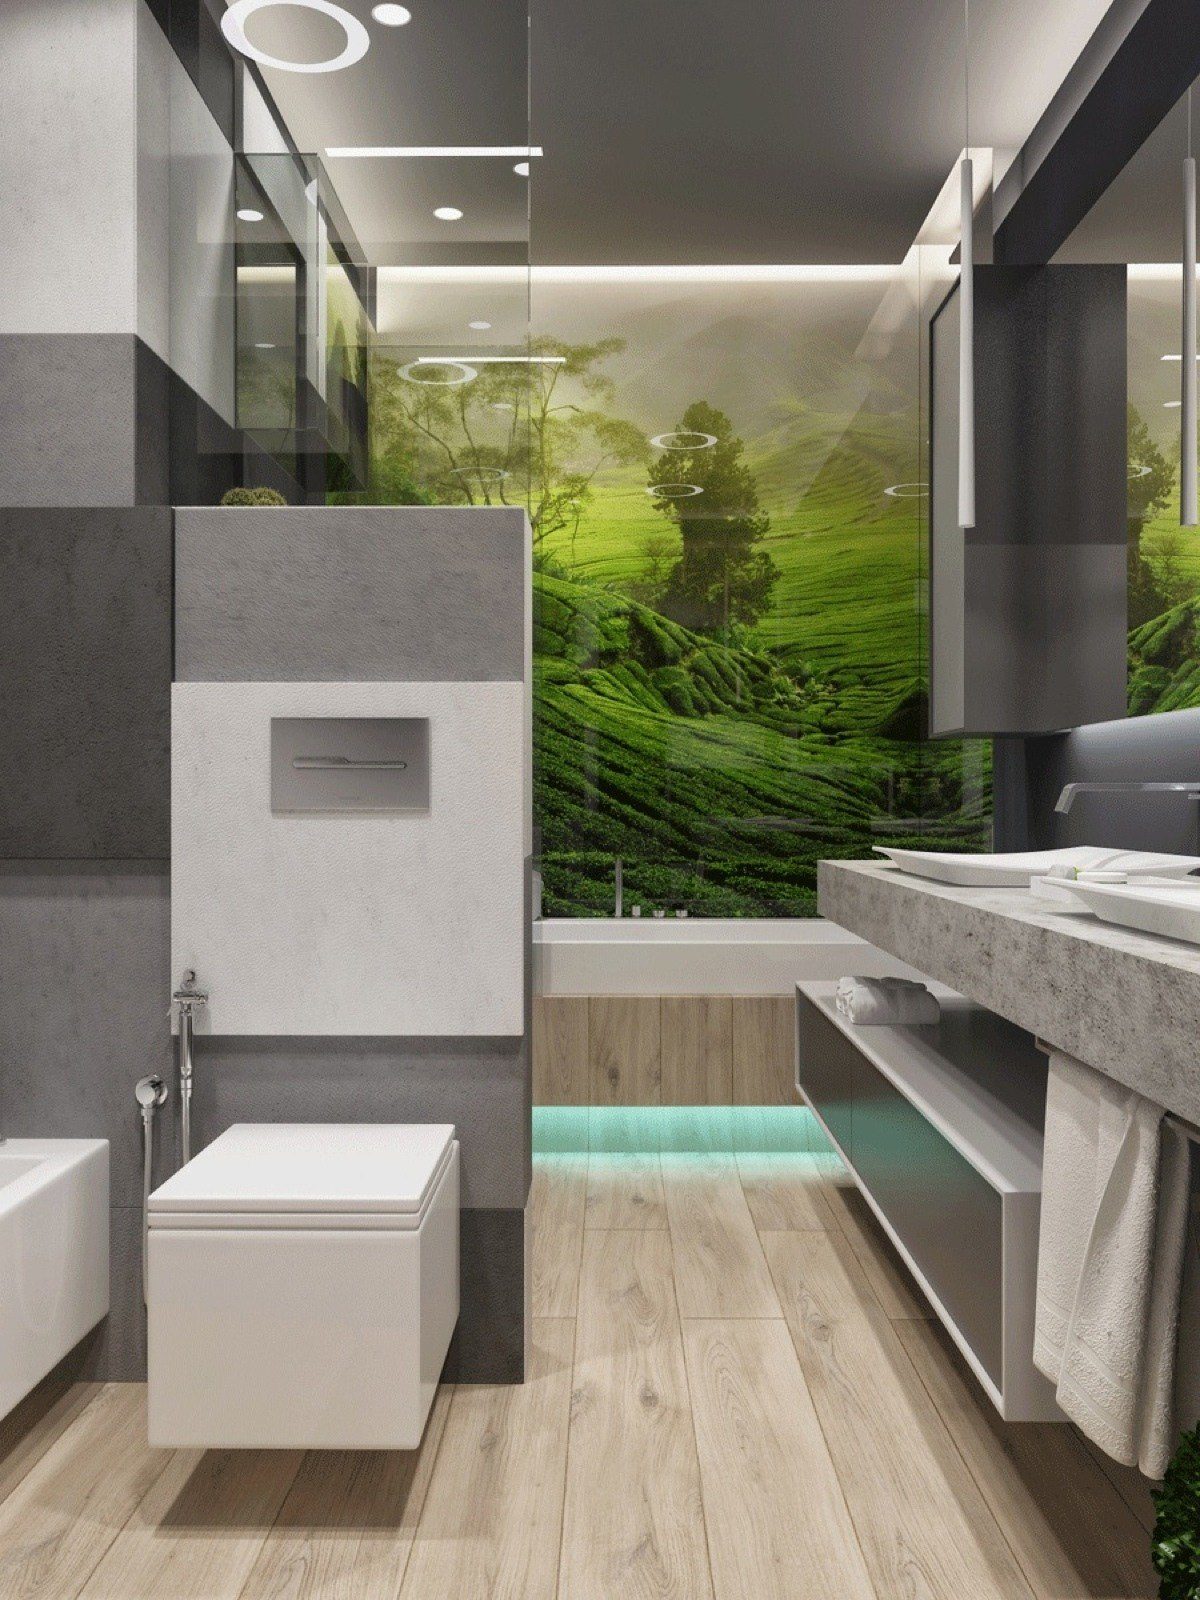 amazing bathroom wall inspiration "width =" 1200 "height =" 1600 "srcset =" https://mileray.com/wp-content/uploads/2020/05/1588515936_308_30-Bathroom-Design-Ideas-Complete-With-Arranging-The-Small-Space.jpg 1200w , https://mileray.com/wp-content/uploads/2016/09/amazing-bathroom-mural-inspiration-Azovskiy-Pahomova-225x300.jpg 225w, https://mileray.com/wp-content/uploads/ 2016/09 / amazing-bathroom-mural-inspiration-Azovskiy-Pahomova-768x1024.jpg 768w, https://mileray.com/wp-content/uploads/2016/09/amazing-bathroom-mural-inspiration-Azovskiy-Pahomova -696x928.jpg 696w, https://mileray.com/wp-content/uploads/2016/09/amazing-bathroom-mural-inspiration-Azovskiy-Pahomova-1068x1424.jpg 1068w, https://mileray.com/wp -content / uploads / 2016/09 / amazing-bathroom-mural-inspiration-Azovskiy-Pahomova-315x420.jpg 315w "sizes =" (maximum width: 1200px) 100vw, 1200px